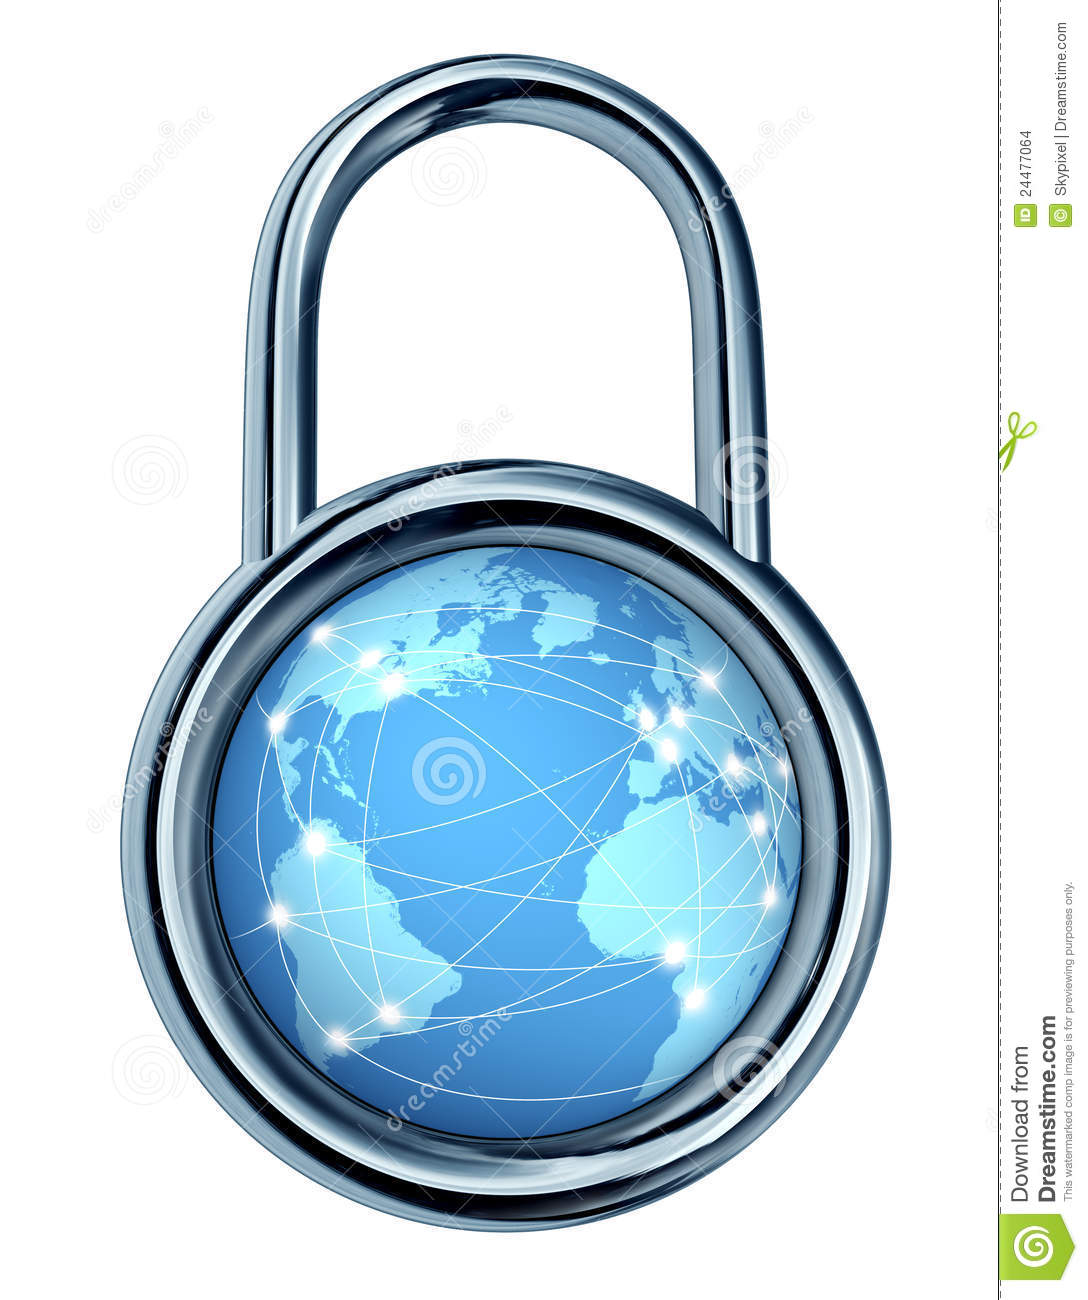 Internet Security Lock With A Locking Symbol In The Shape Of A Circle